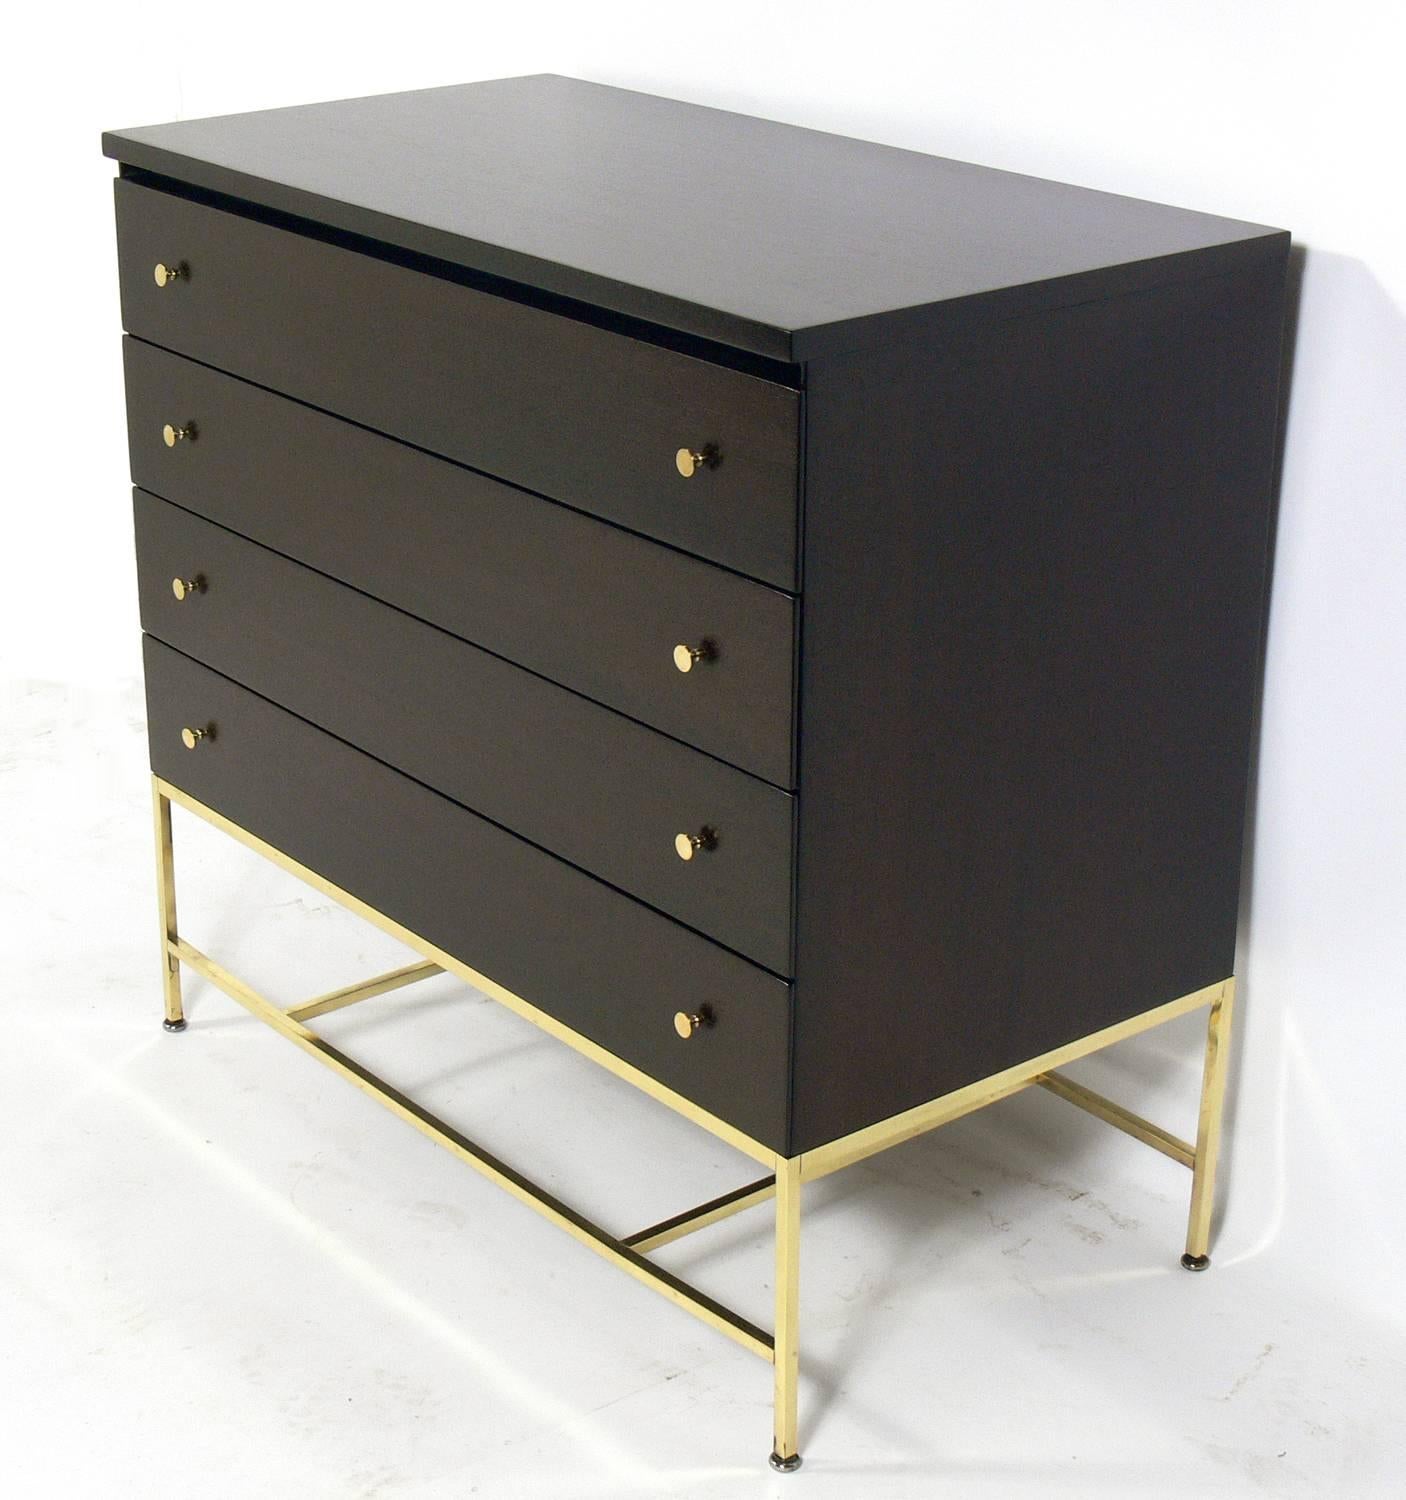 Clean lined chest with brass hardware designed by Paul McCobb.